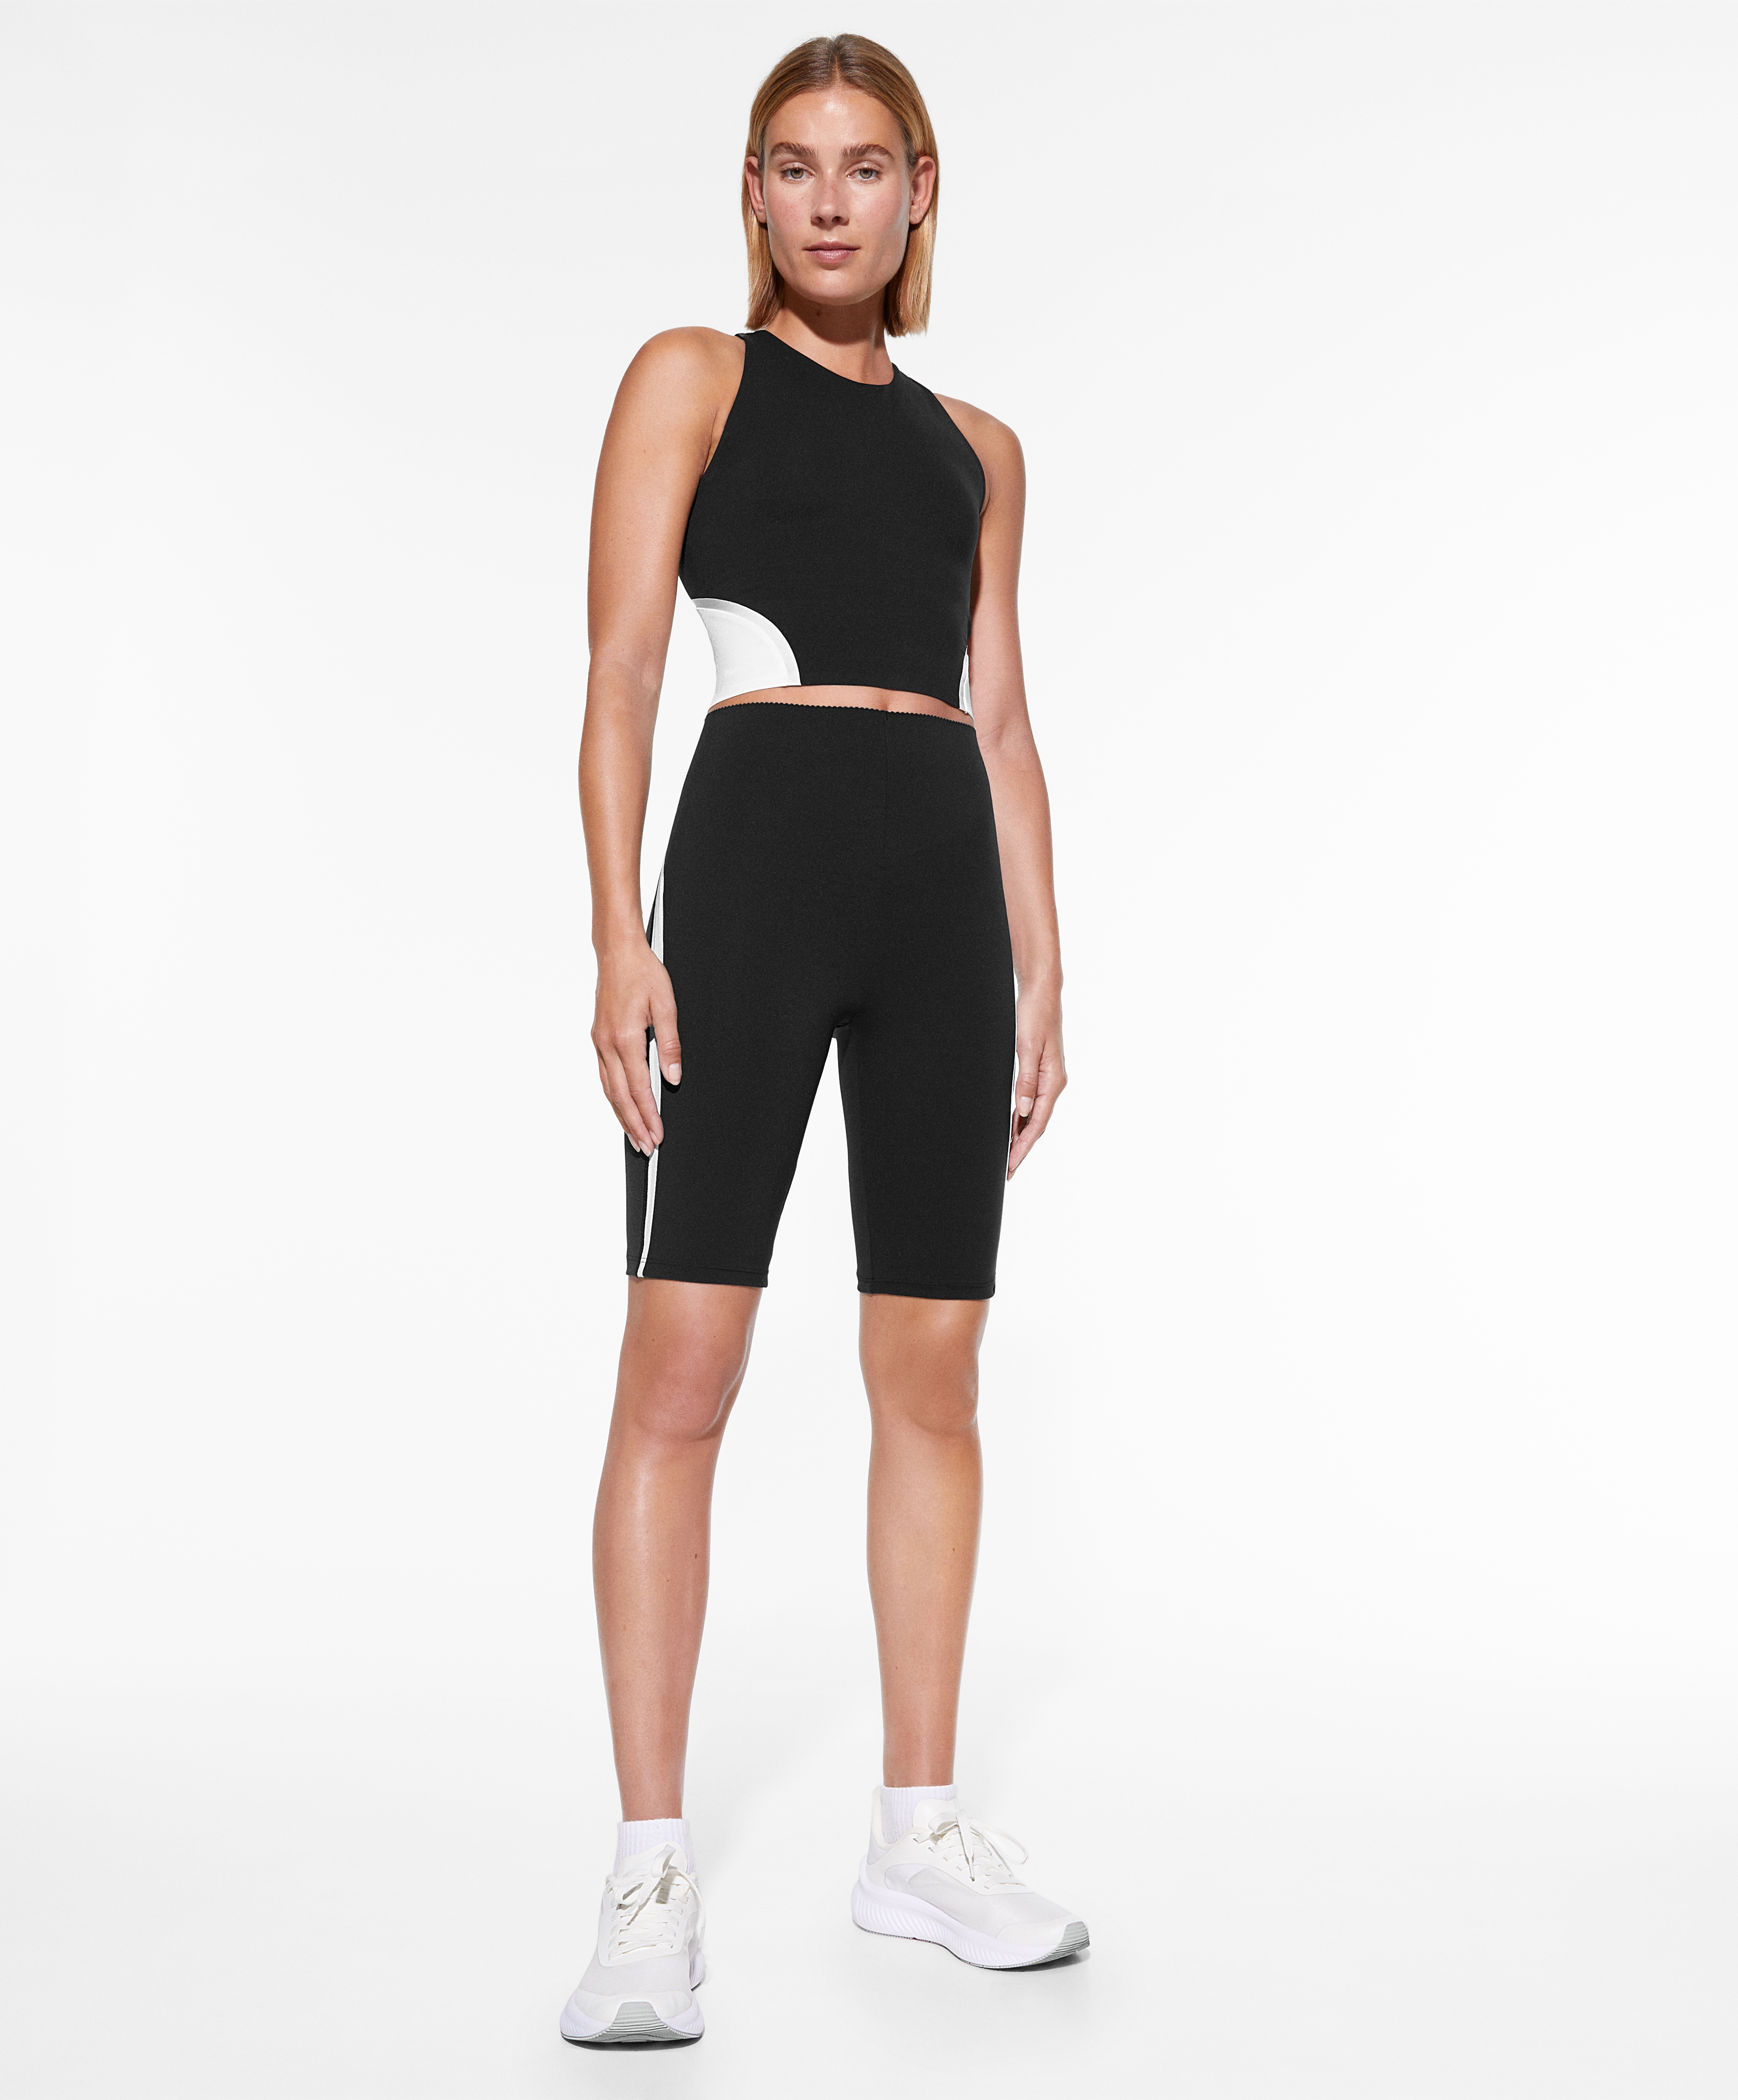 Black compressive raise up cycling total look